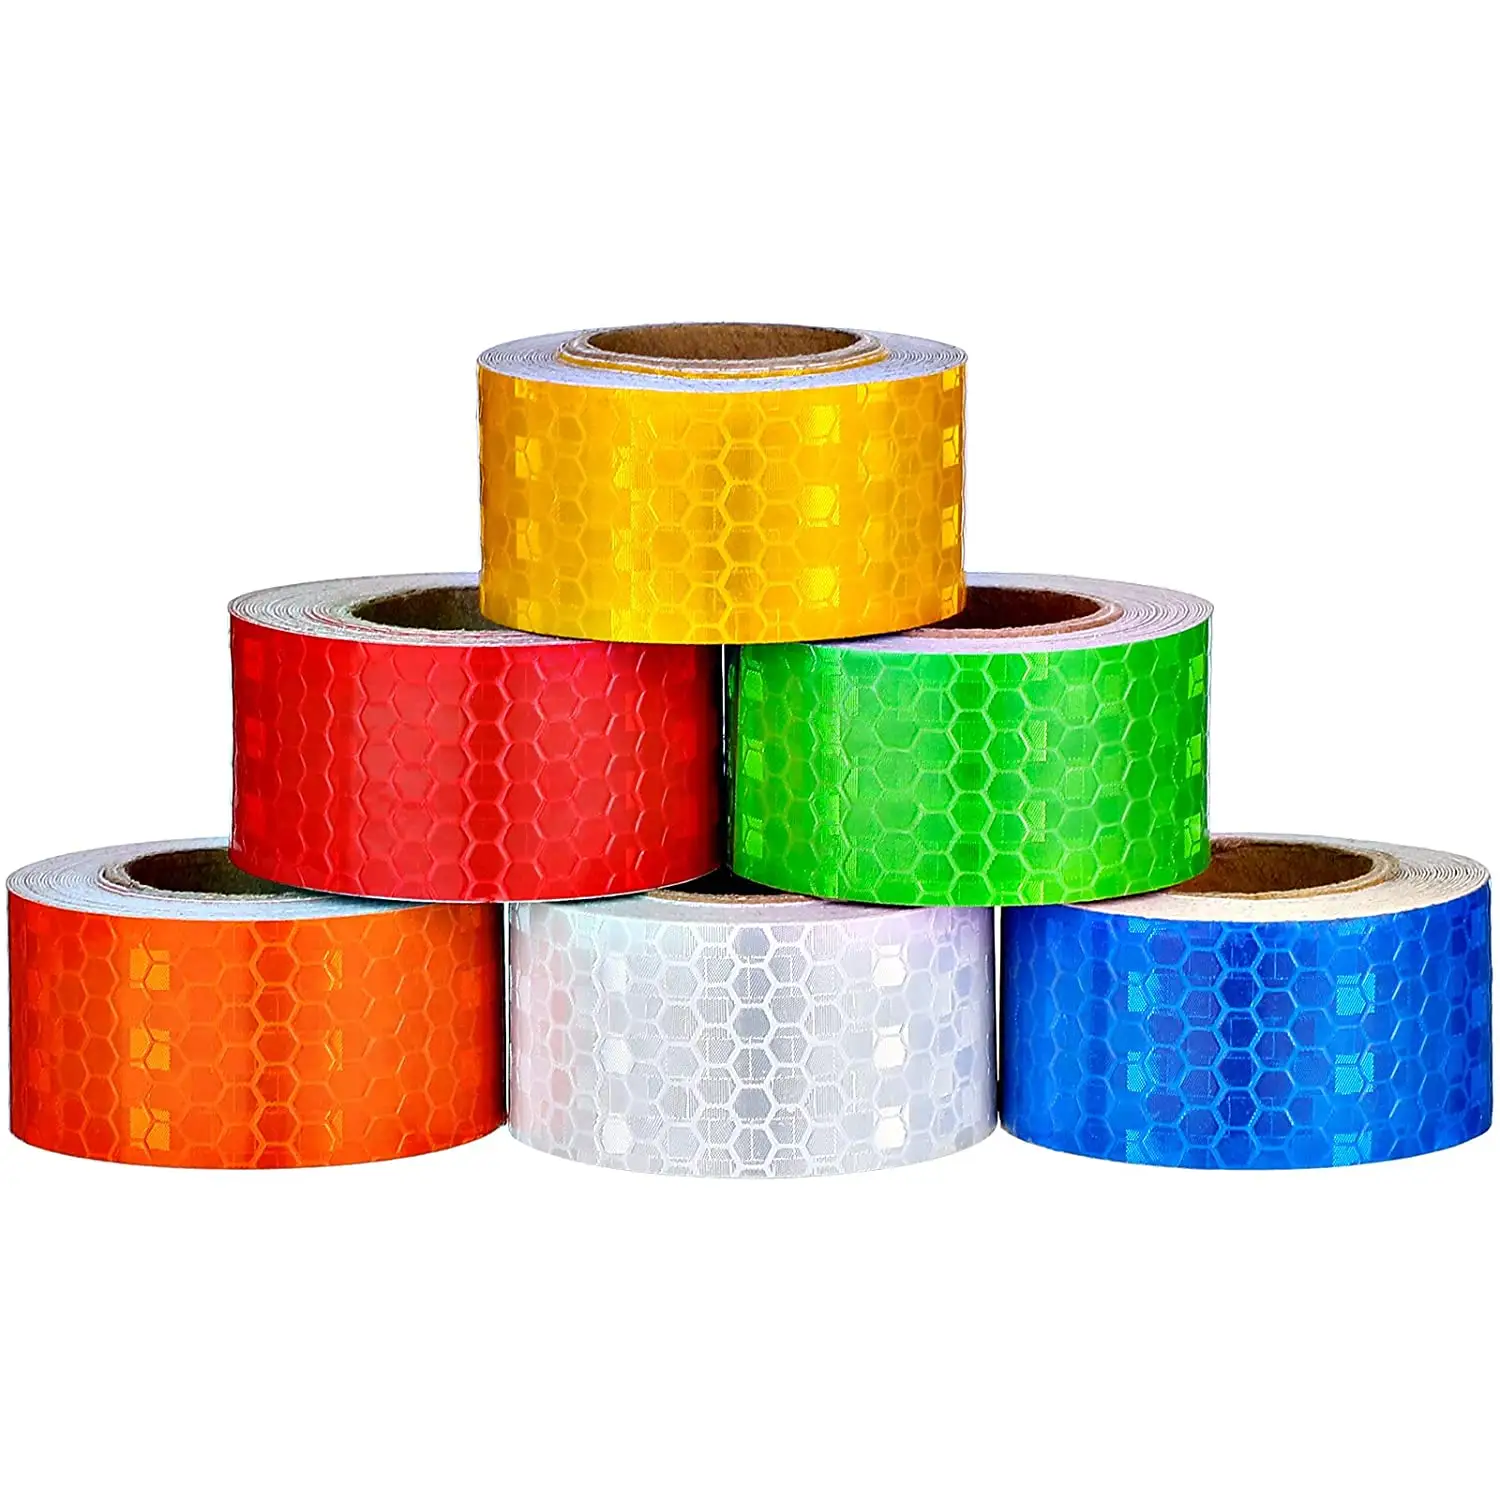 Reflective Tapes 6 Colors Reflective Warning Tape Night Safety Sticker, Silver, Blue, Red, Yellow, Orange, Green